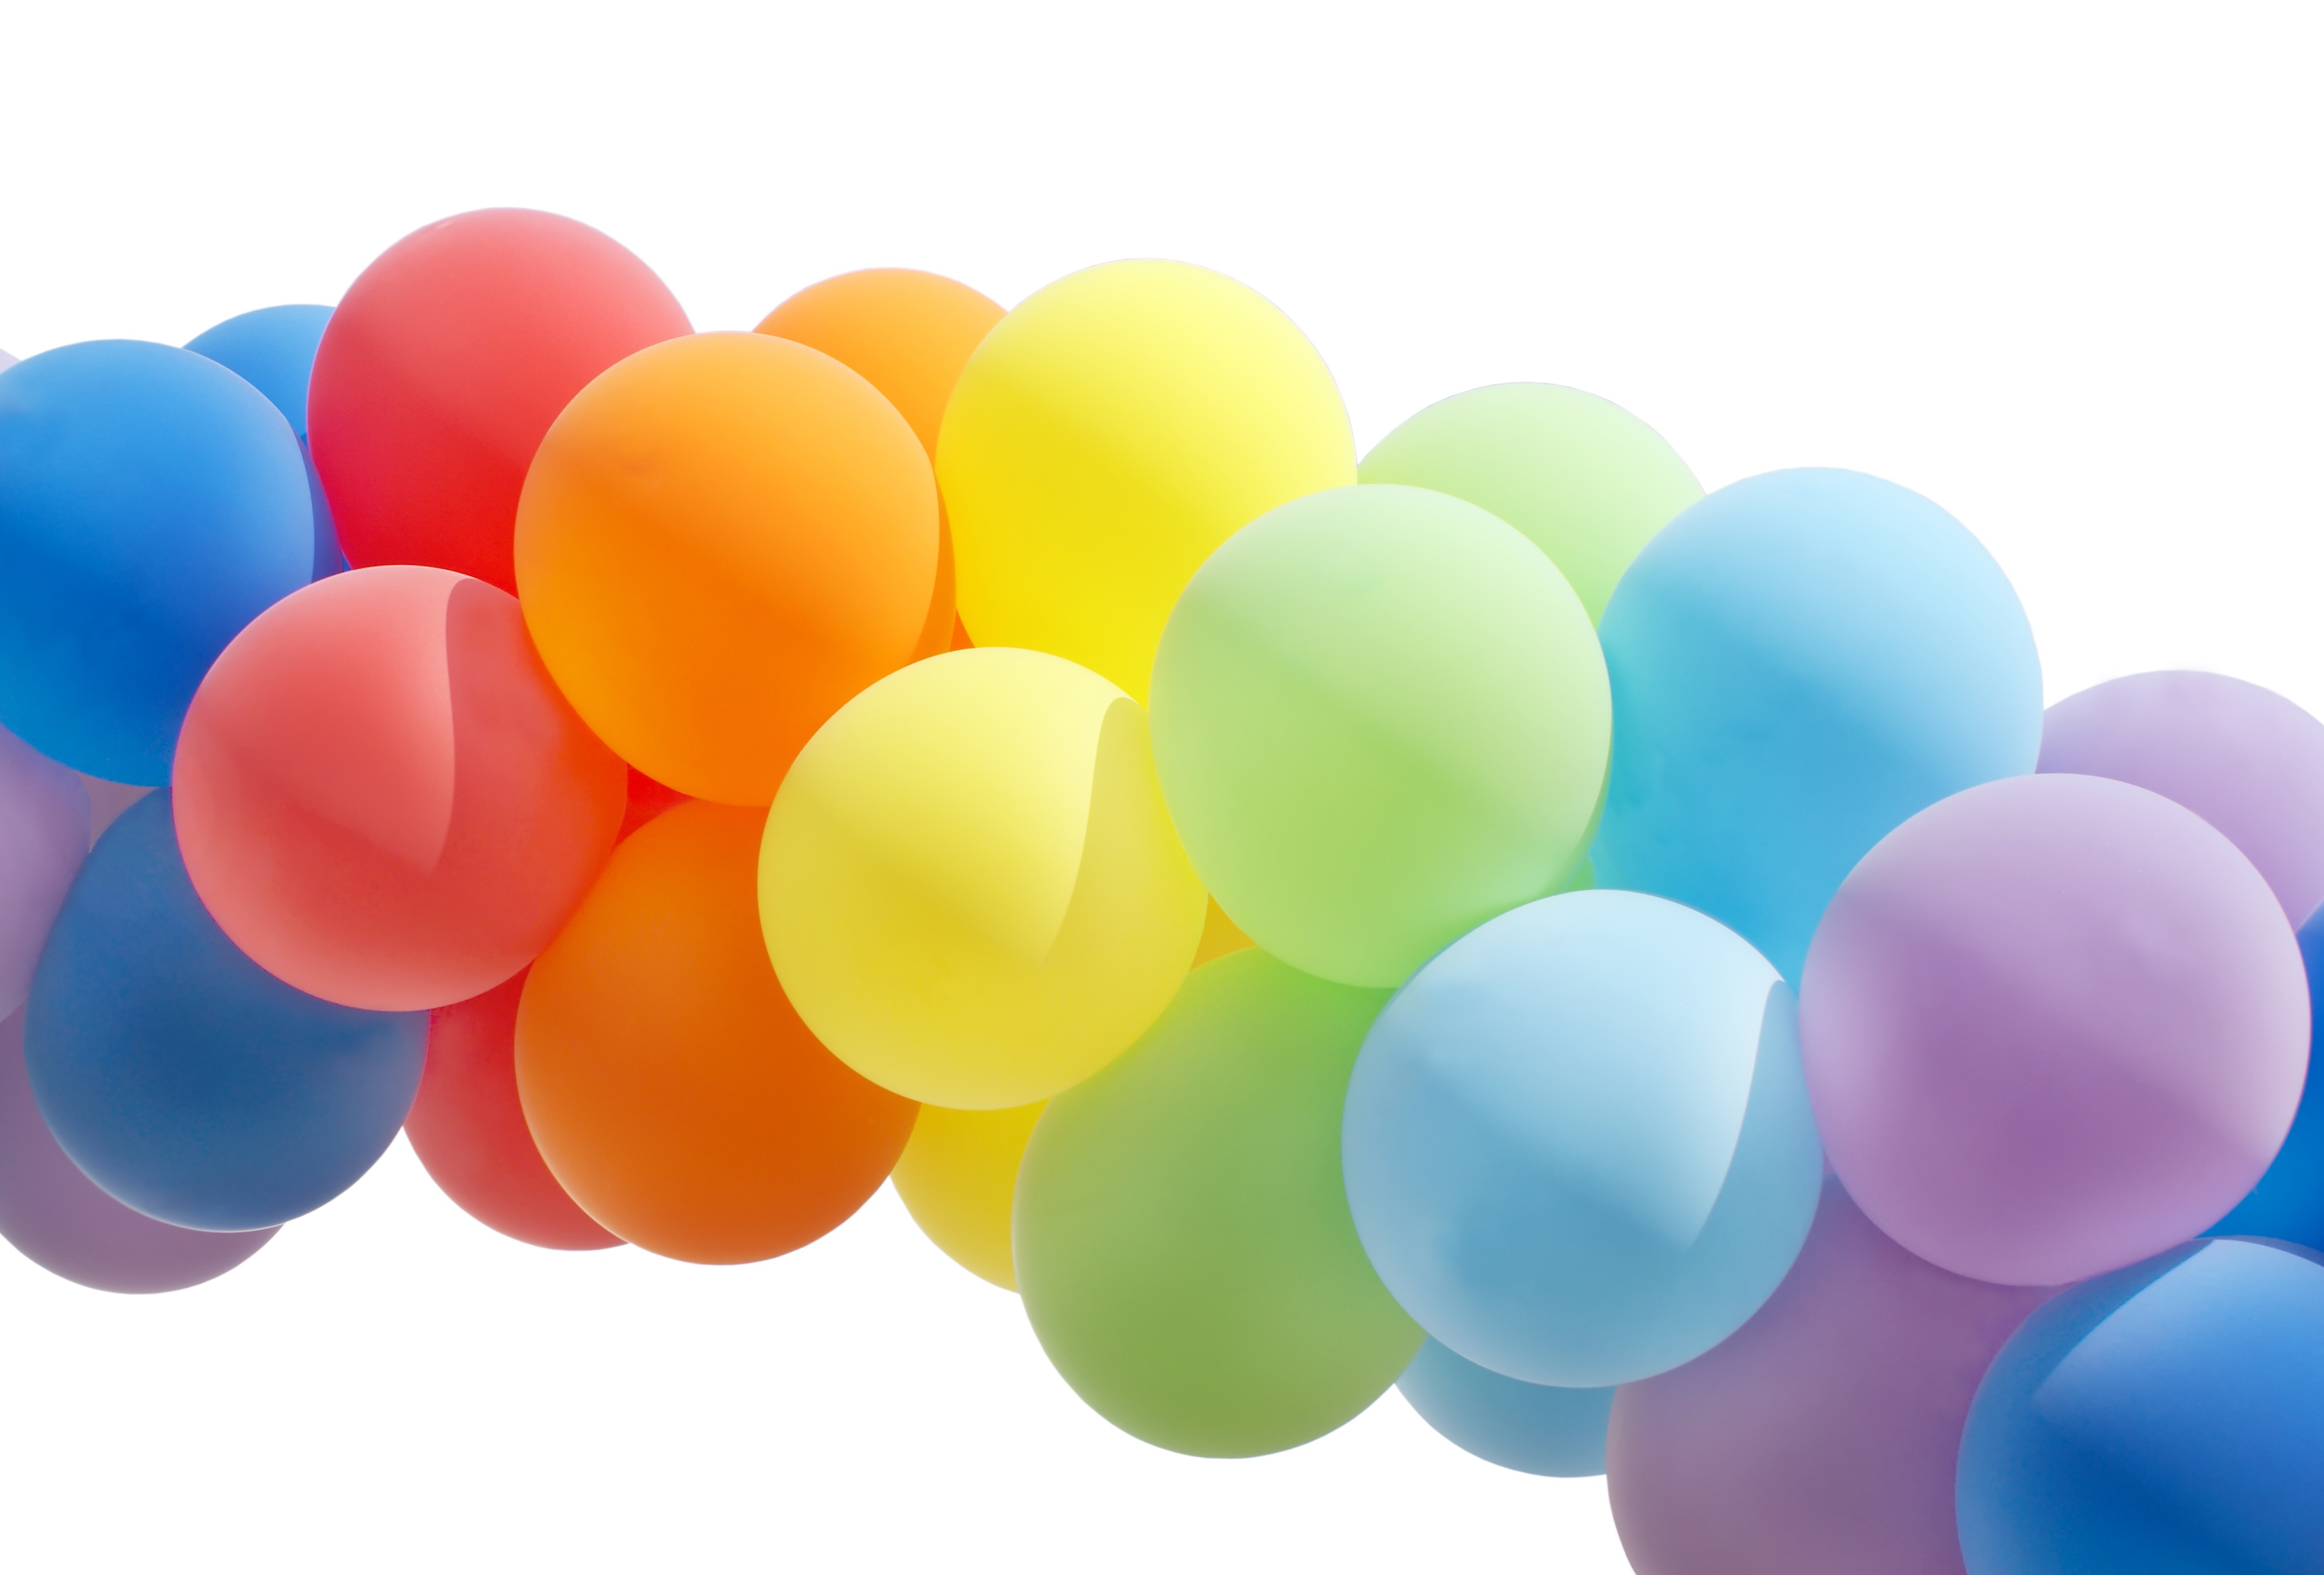 Colorful Balloon Forming a Archway